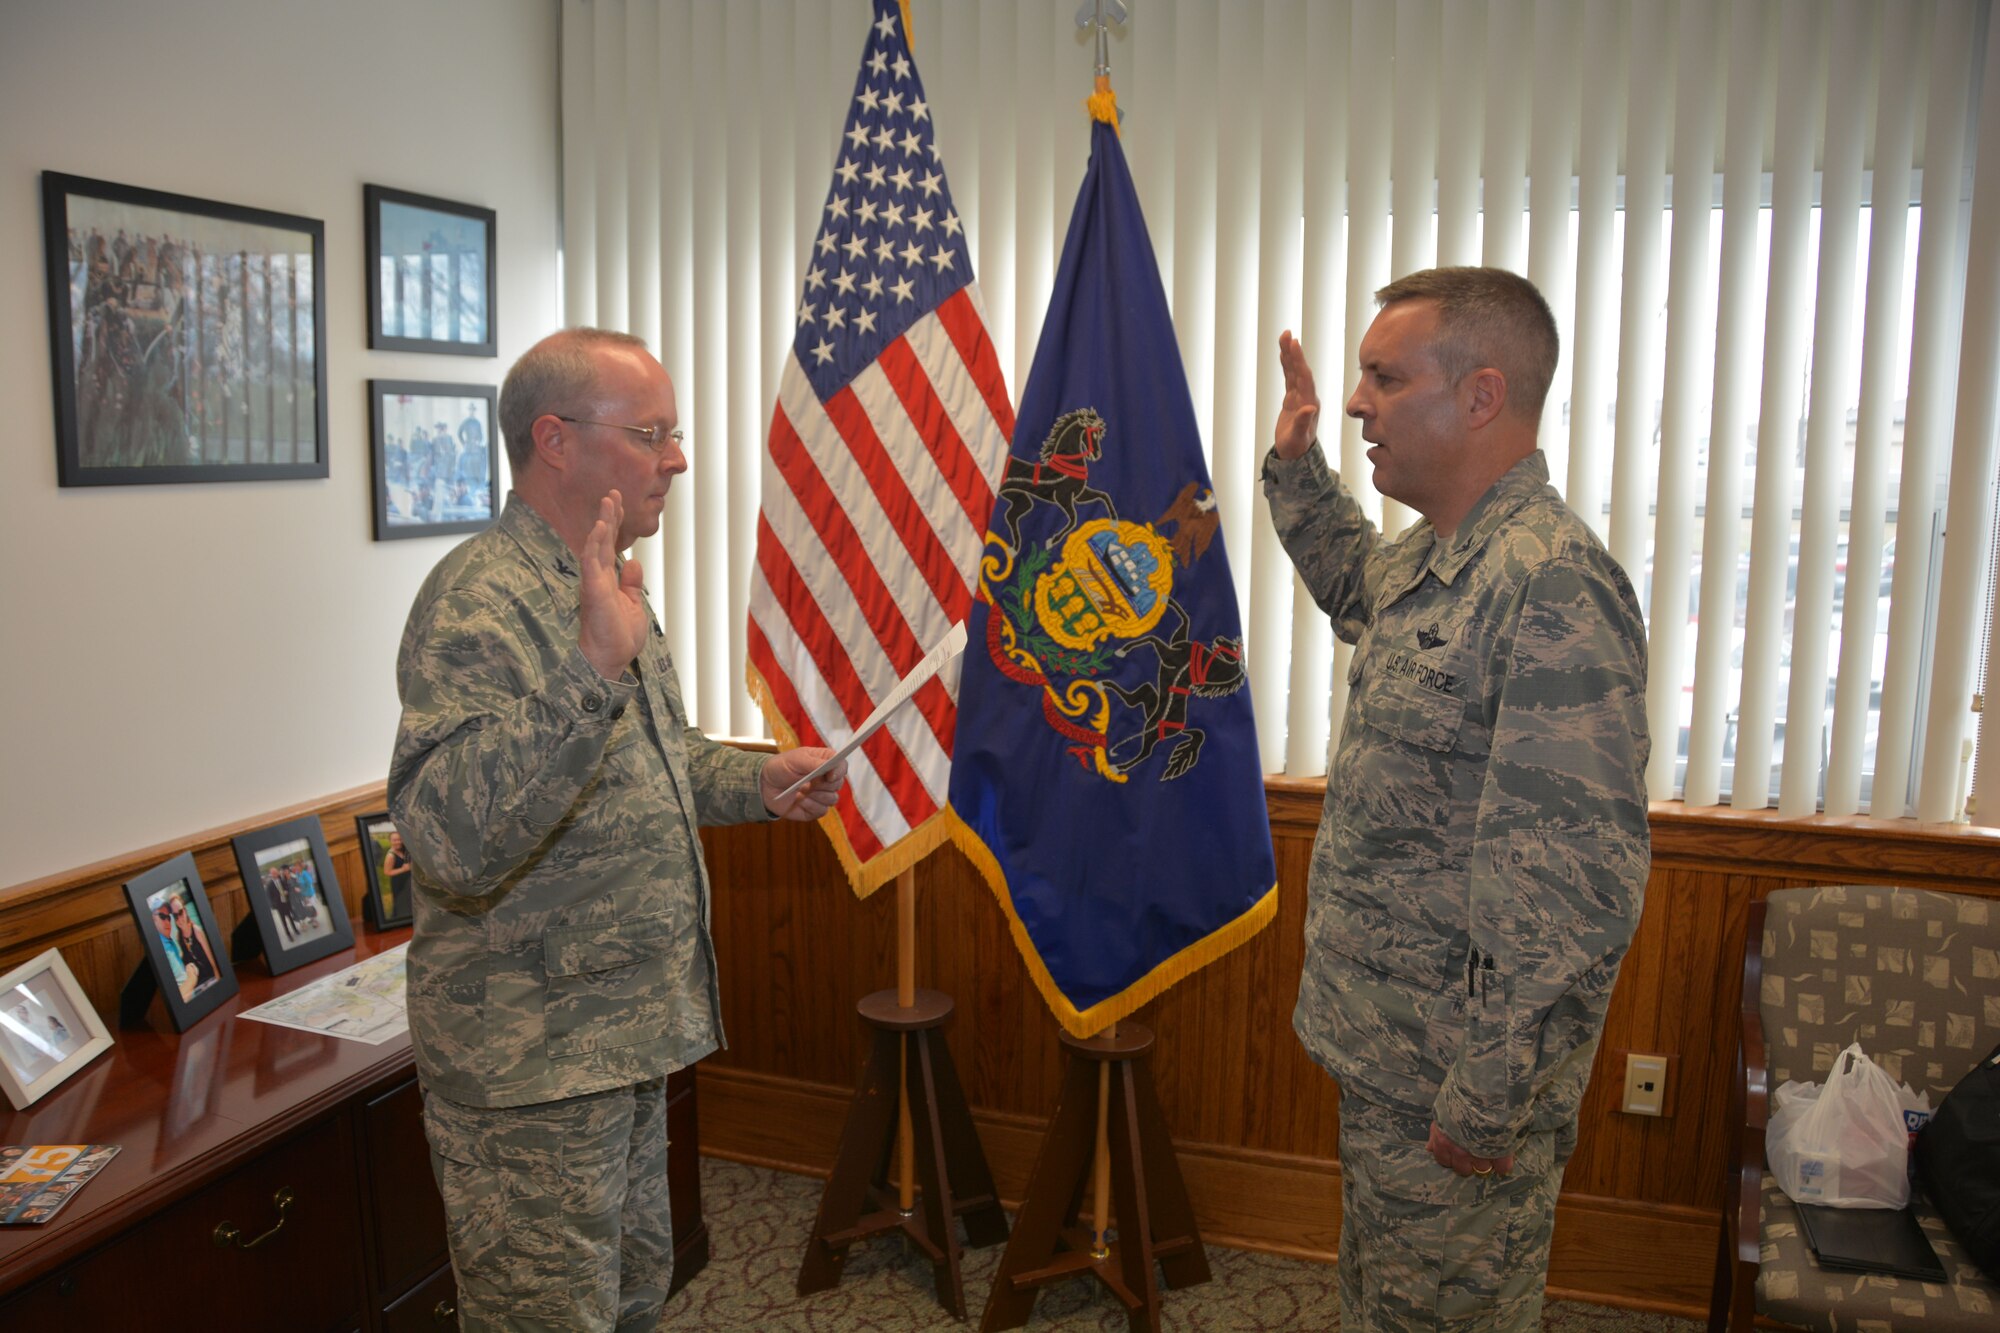 Col. Mike Cason, 193rd Special Operations Wing commander (right), raises his right hand as Col. Mike Regan, Deputy Adjutant General – Air (left), swears him into the Pennsylvania Air National Guard. Cason served as the wing commander since 2015 all while maintaining dual status as an active-duty Airman and a member of the guard – a unique position that required approval from the Secretary of Defense. He has made the decision to exit active duty and officially join the PaANG, allowing him to continue on as wing commander and provide service to the Commonwealth into the foreseeable future. (U.S. Air National Guard Photo by Senior Master Sgt. Martina Crouse/Released)